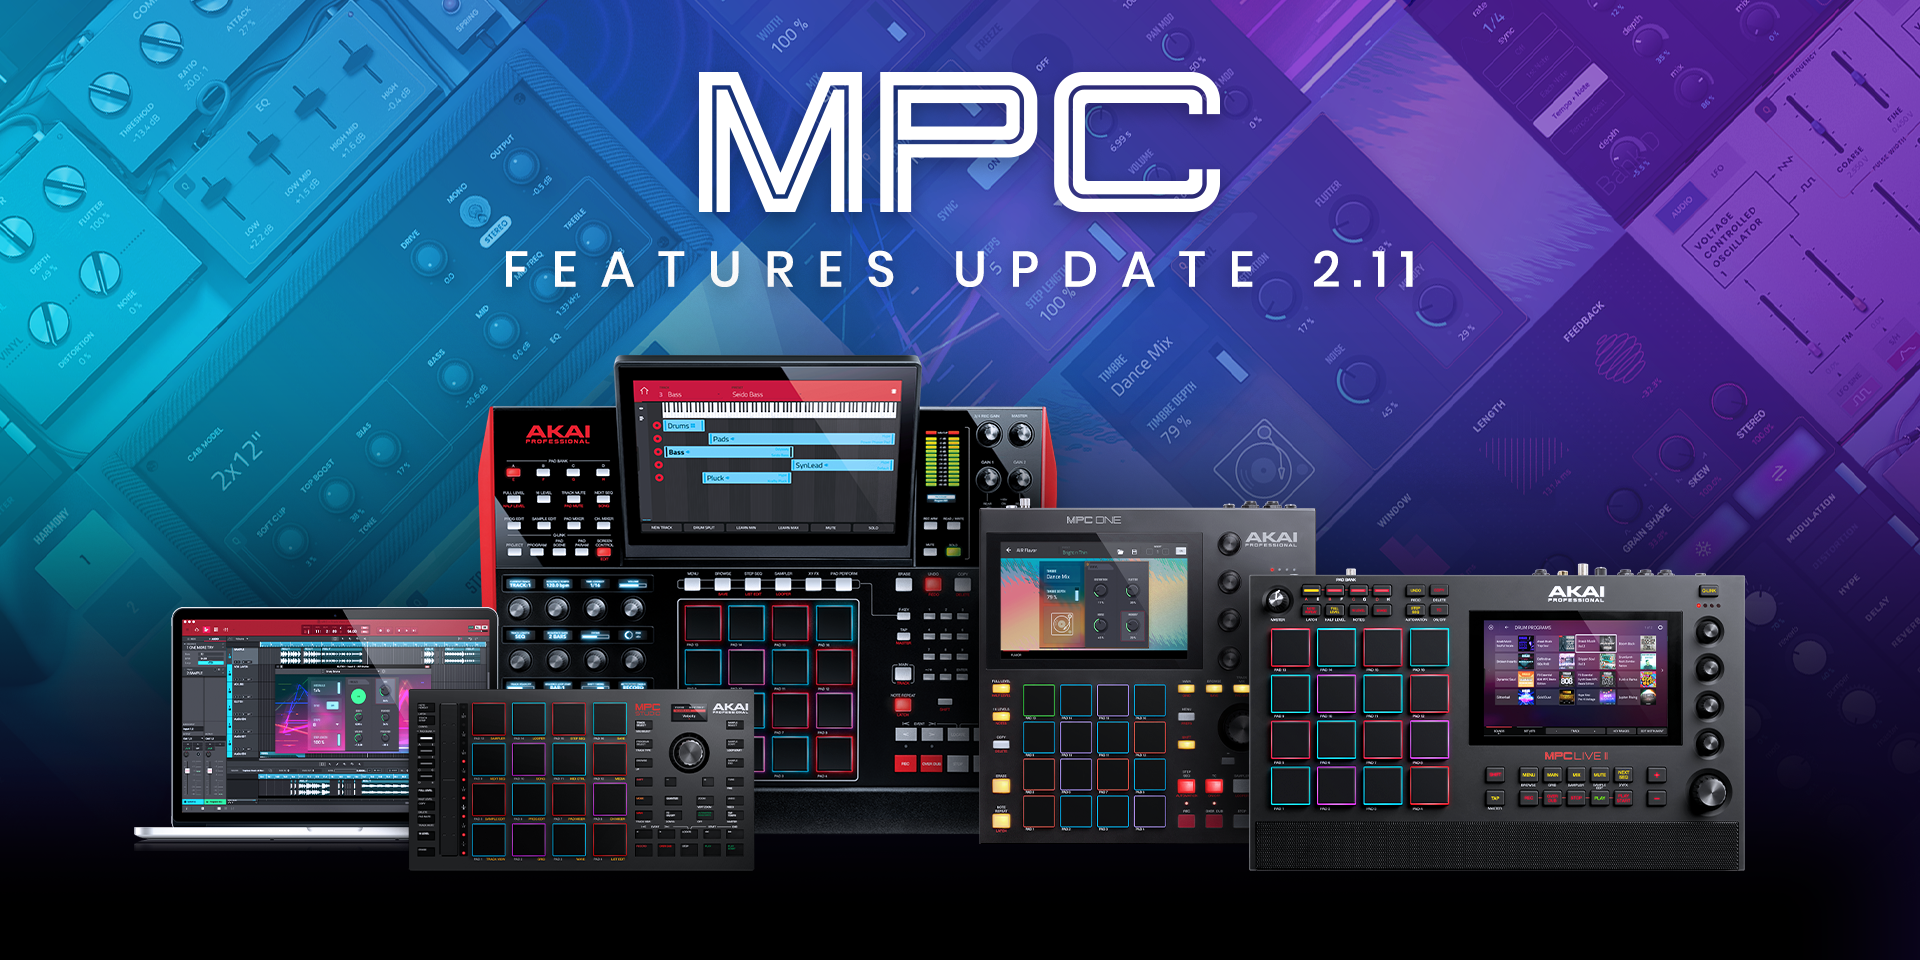 MPC v2.11 Software Features Update | Akai Professional